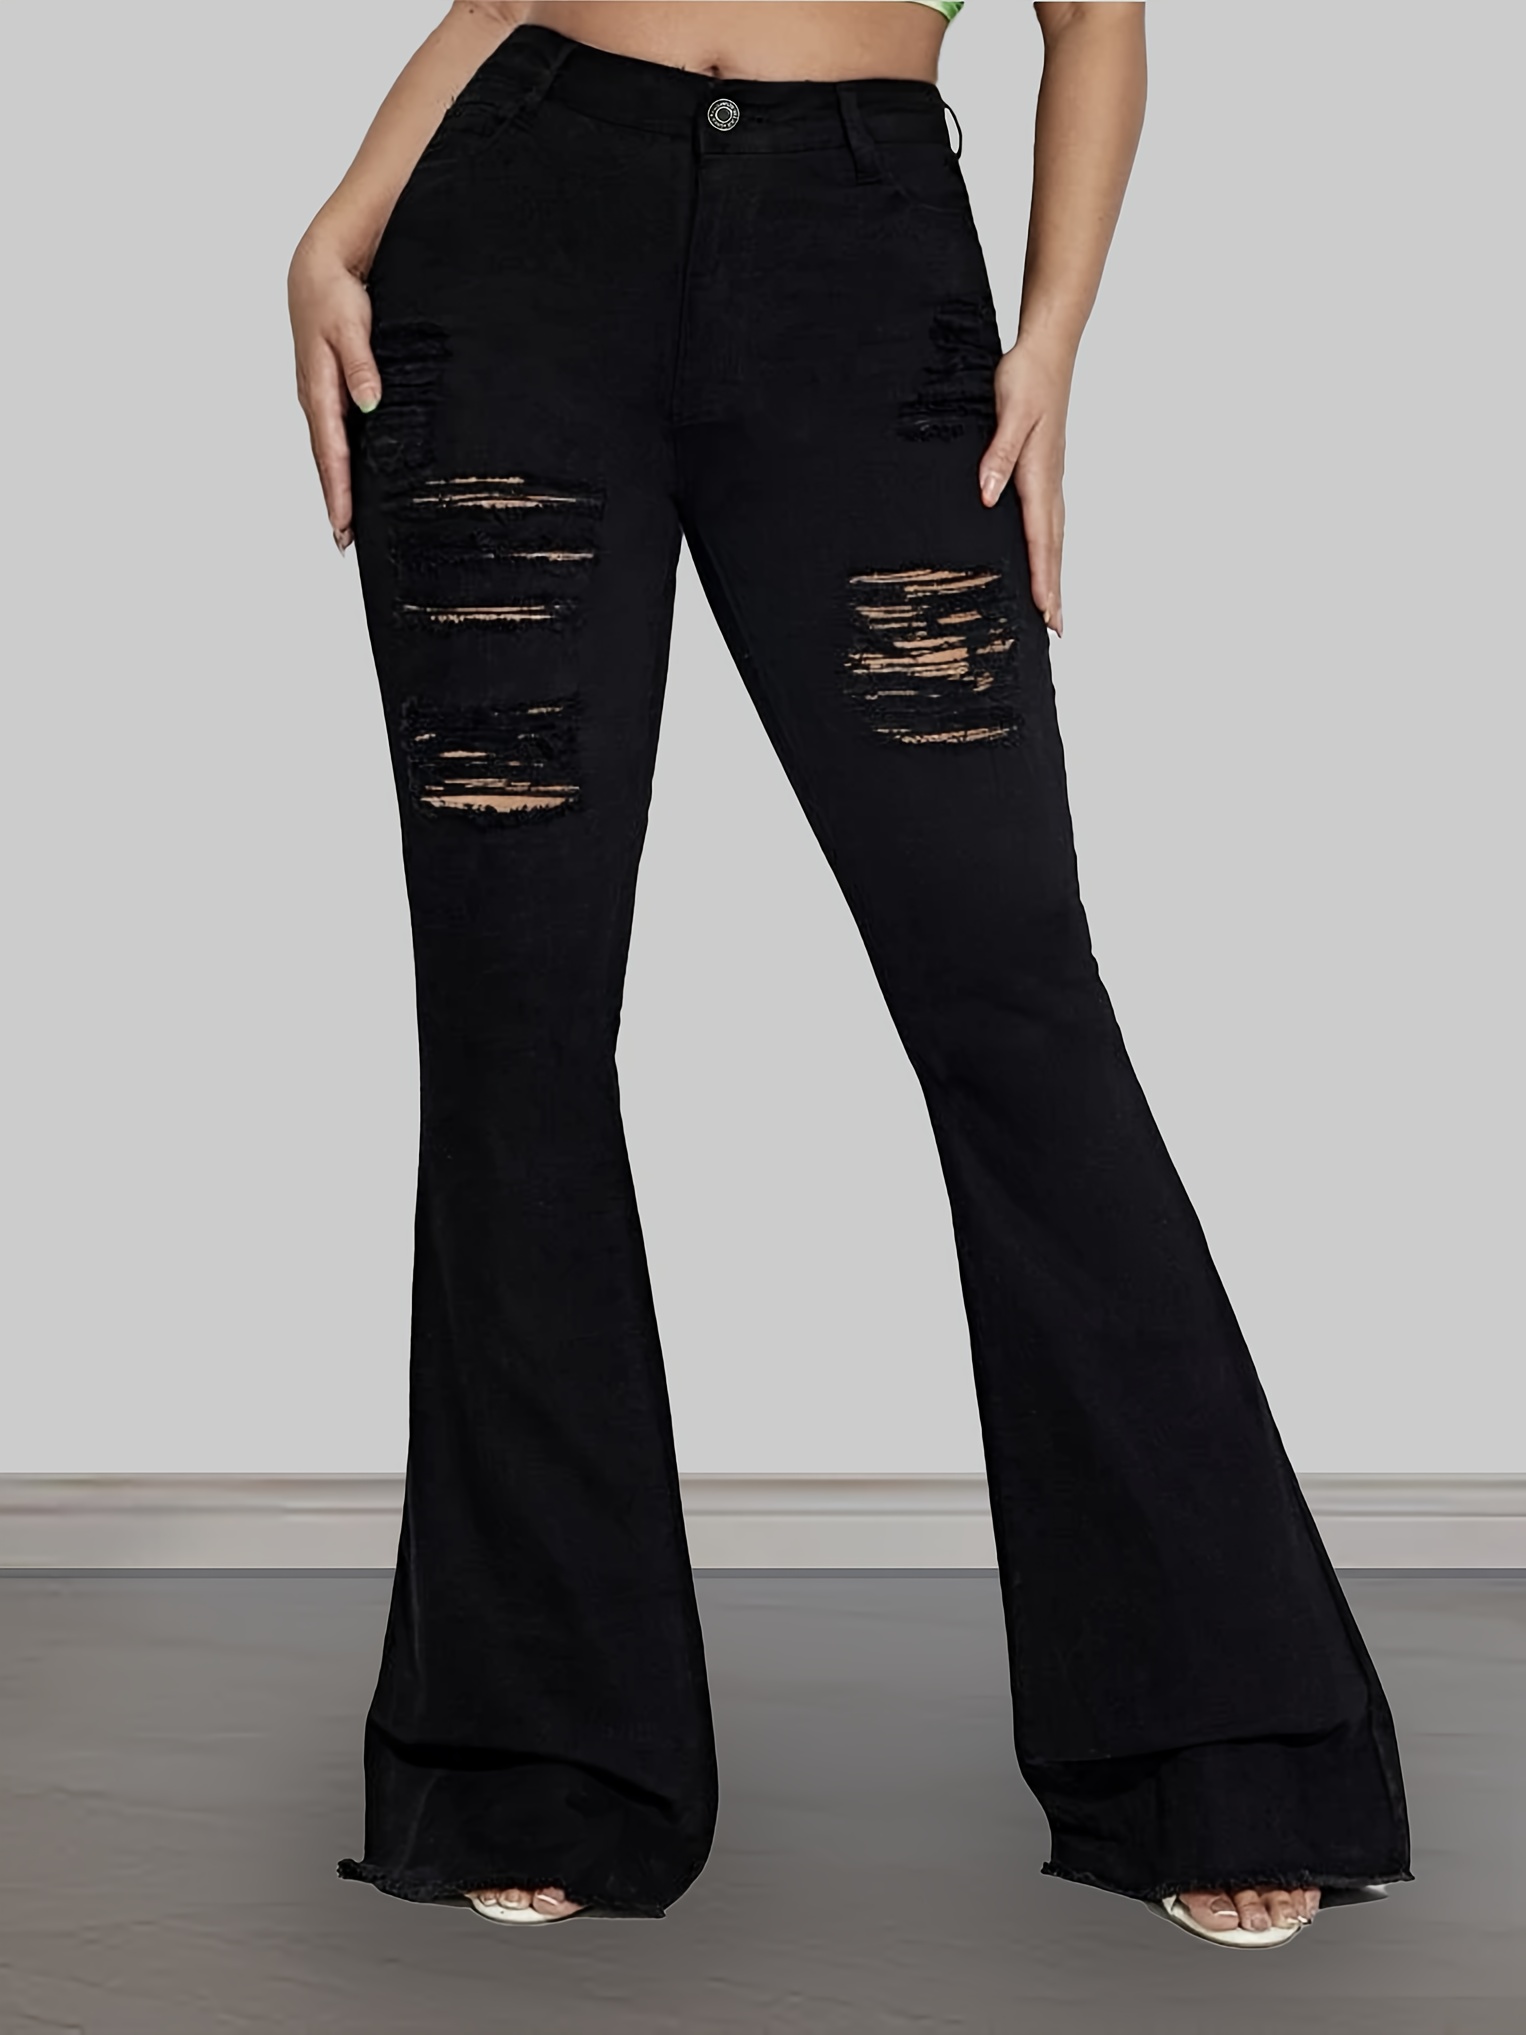 Black Ripped Holes Bell Bottom Jeans, High Waisted Fashion Flare Denim  Pants, Women's Denim Jeans & Clothing